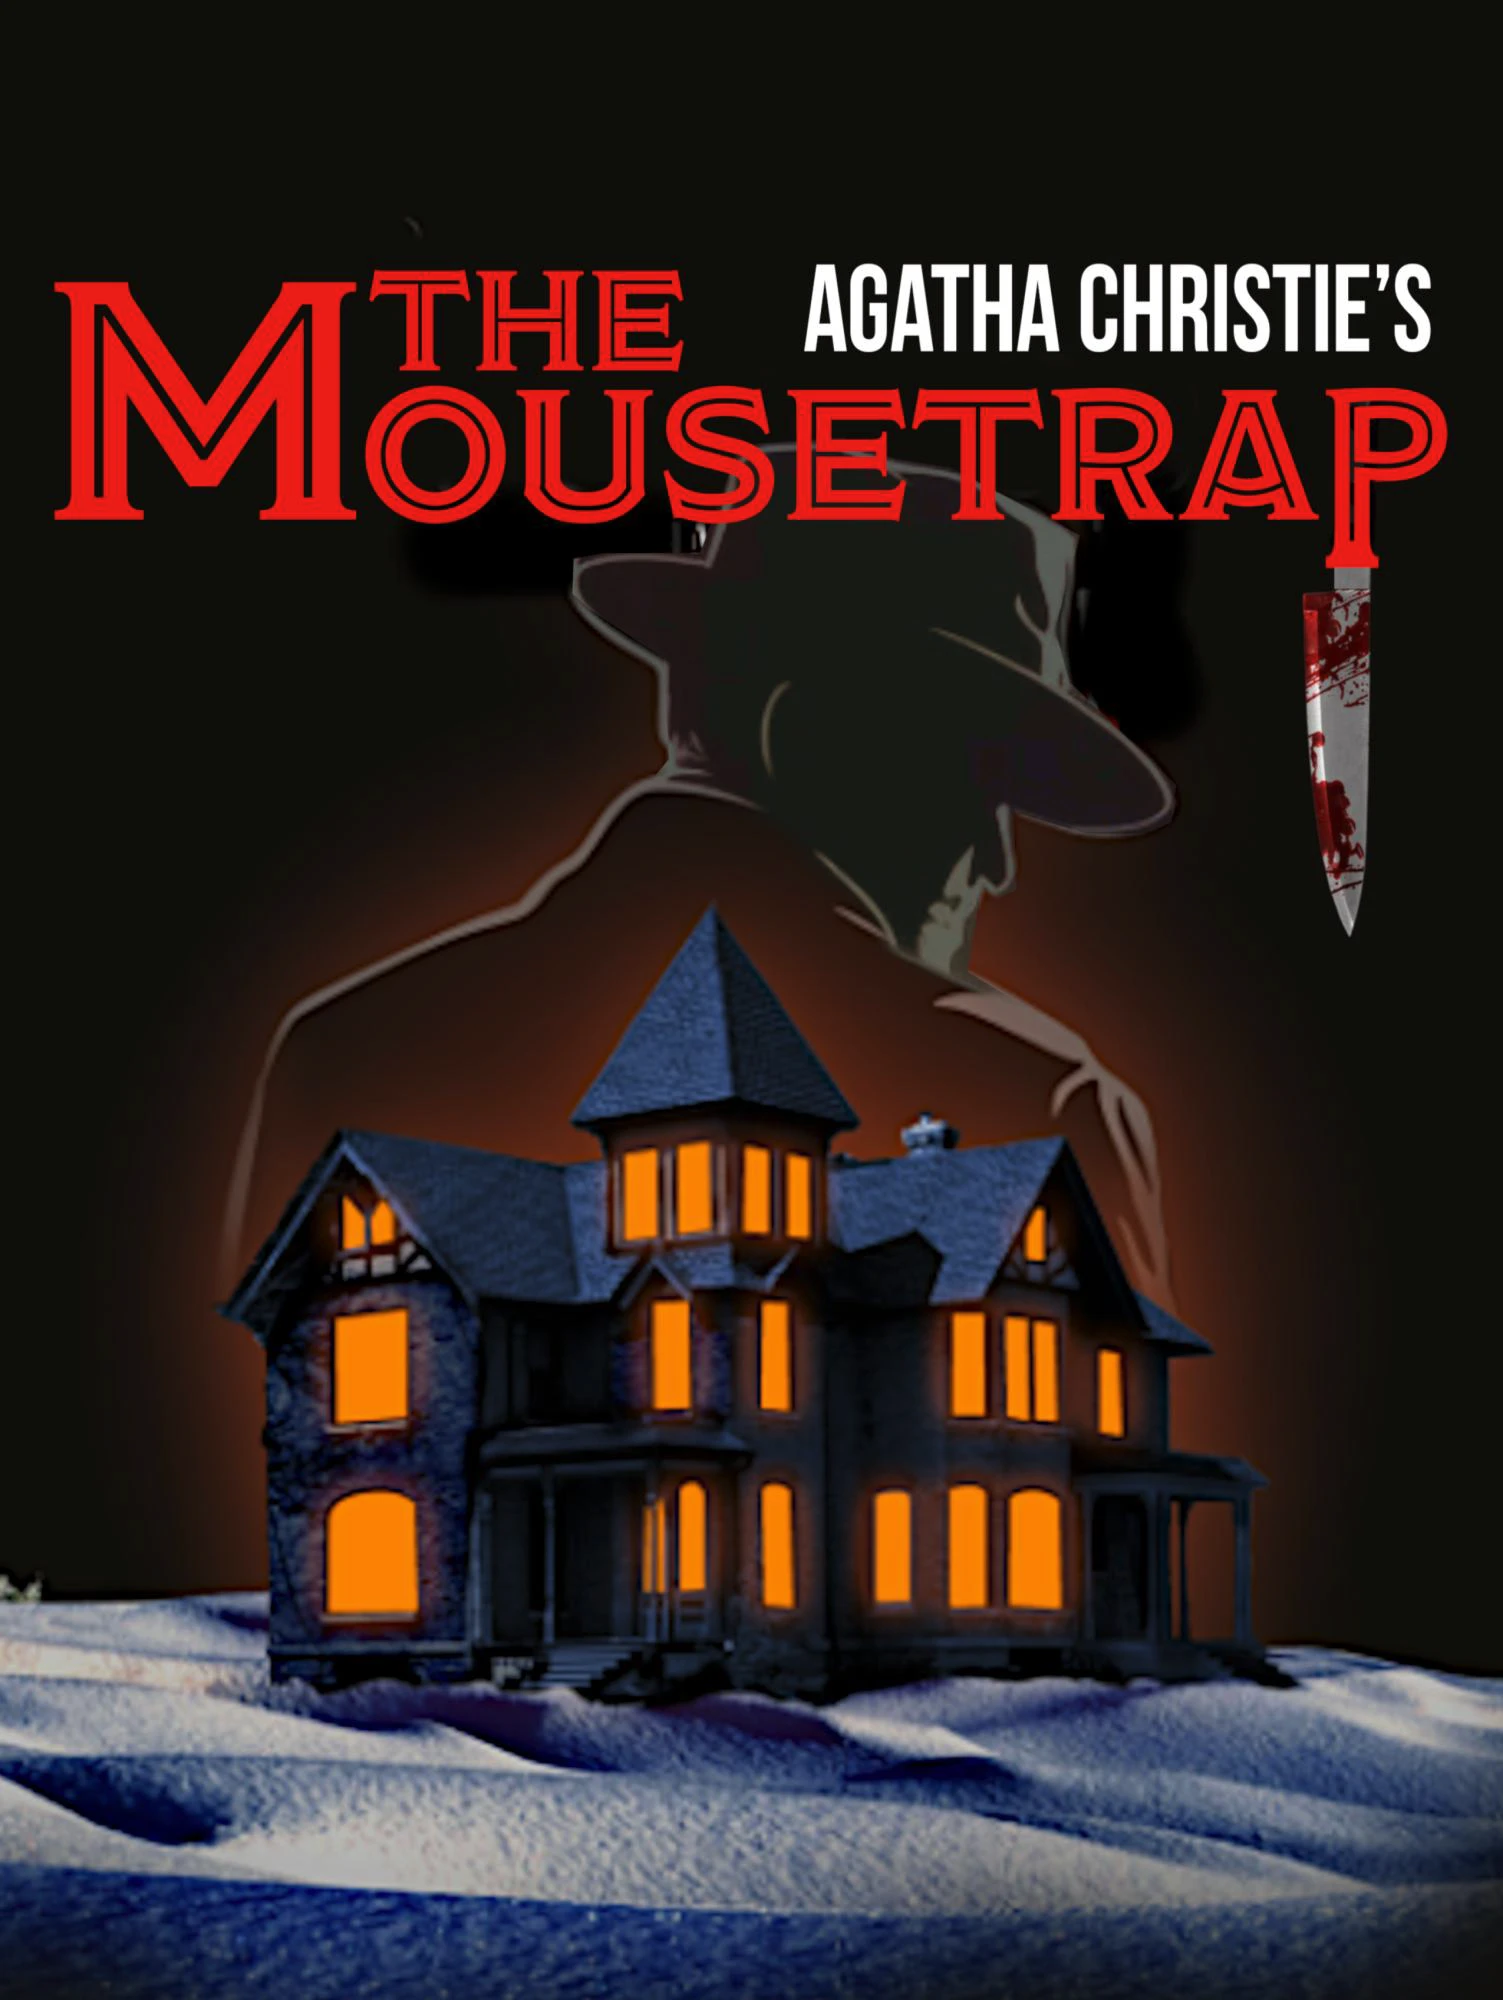 image from The Mousetrap